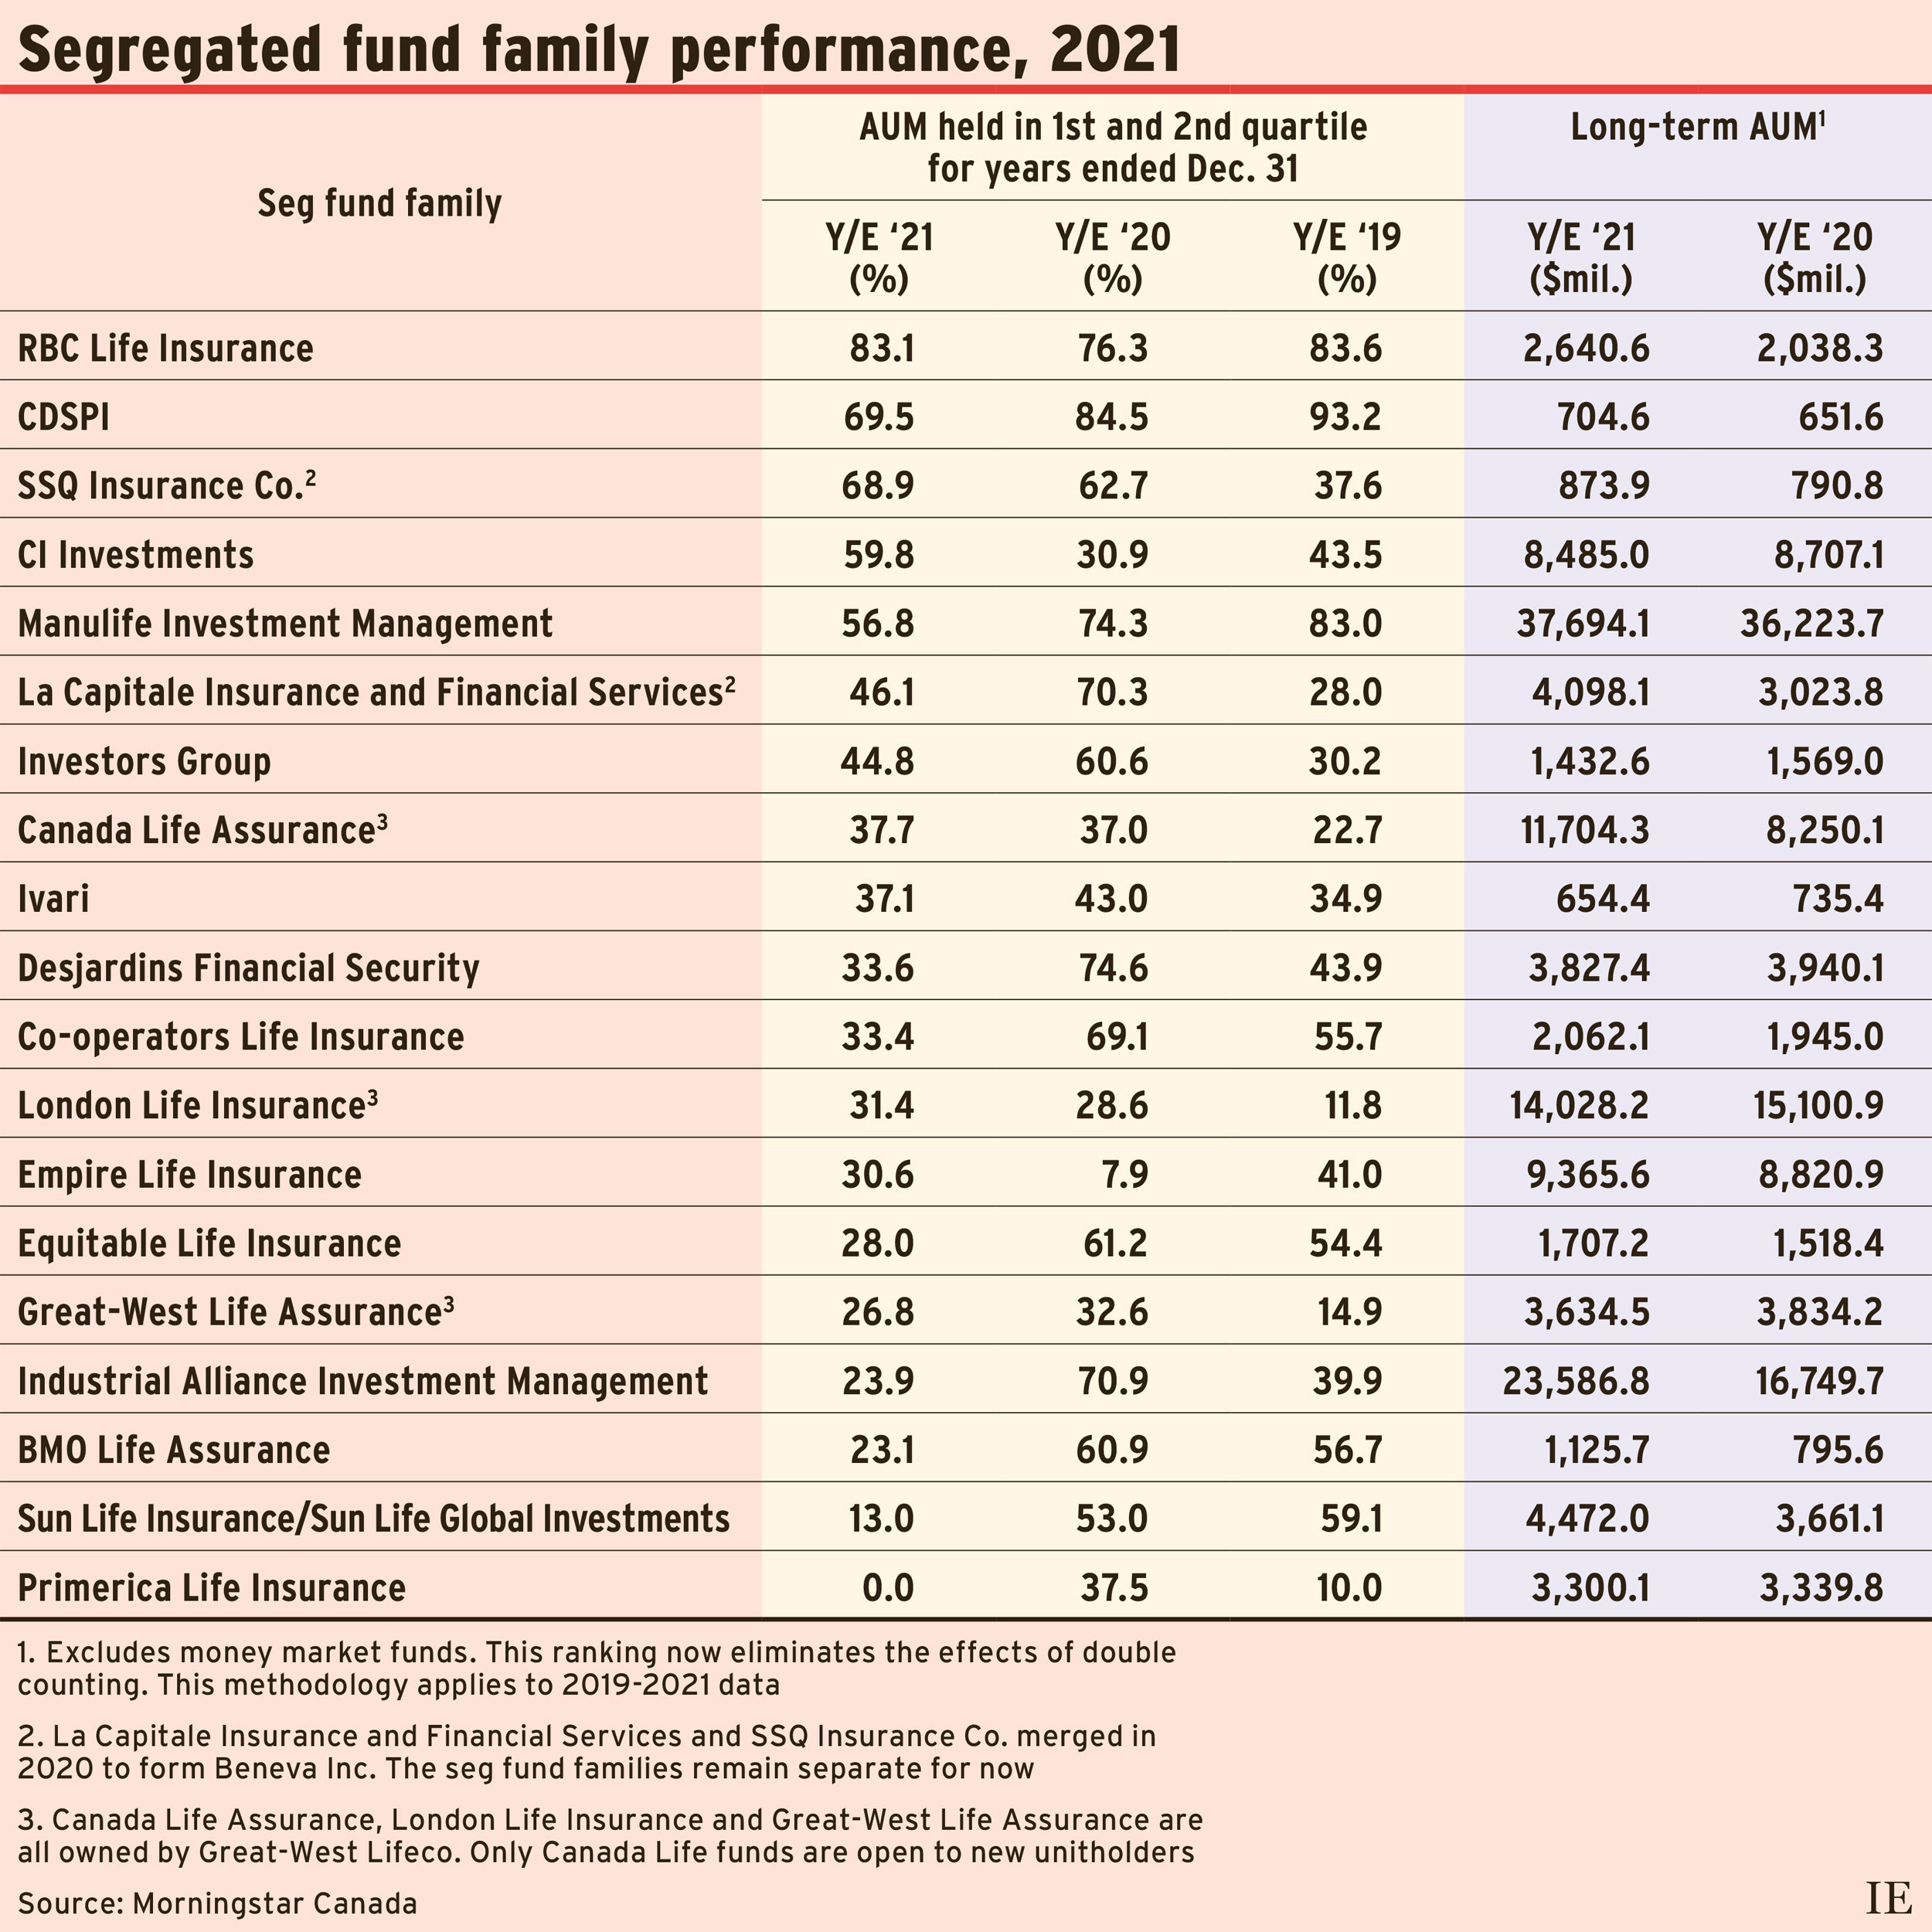 Segregated fund family performance, 2021